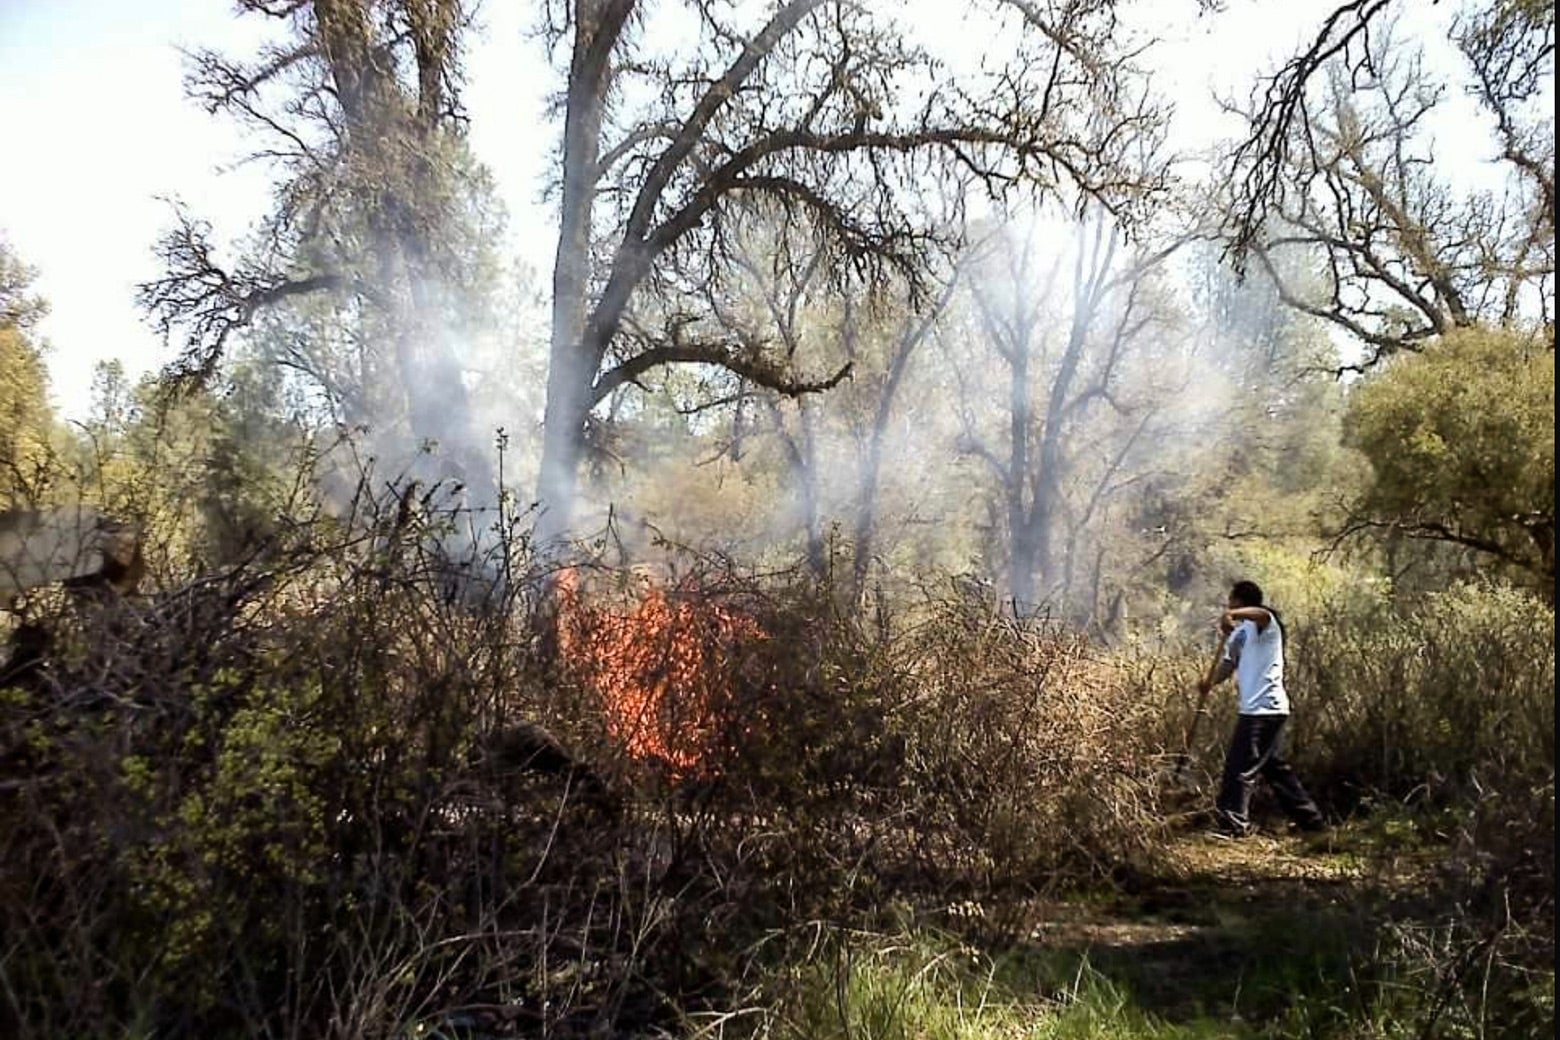 A man uses tools to attend to a small brush fire, surrounded by larger trees, in a California forest. 